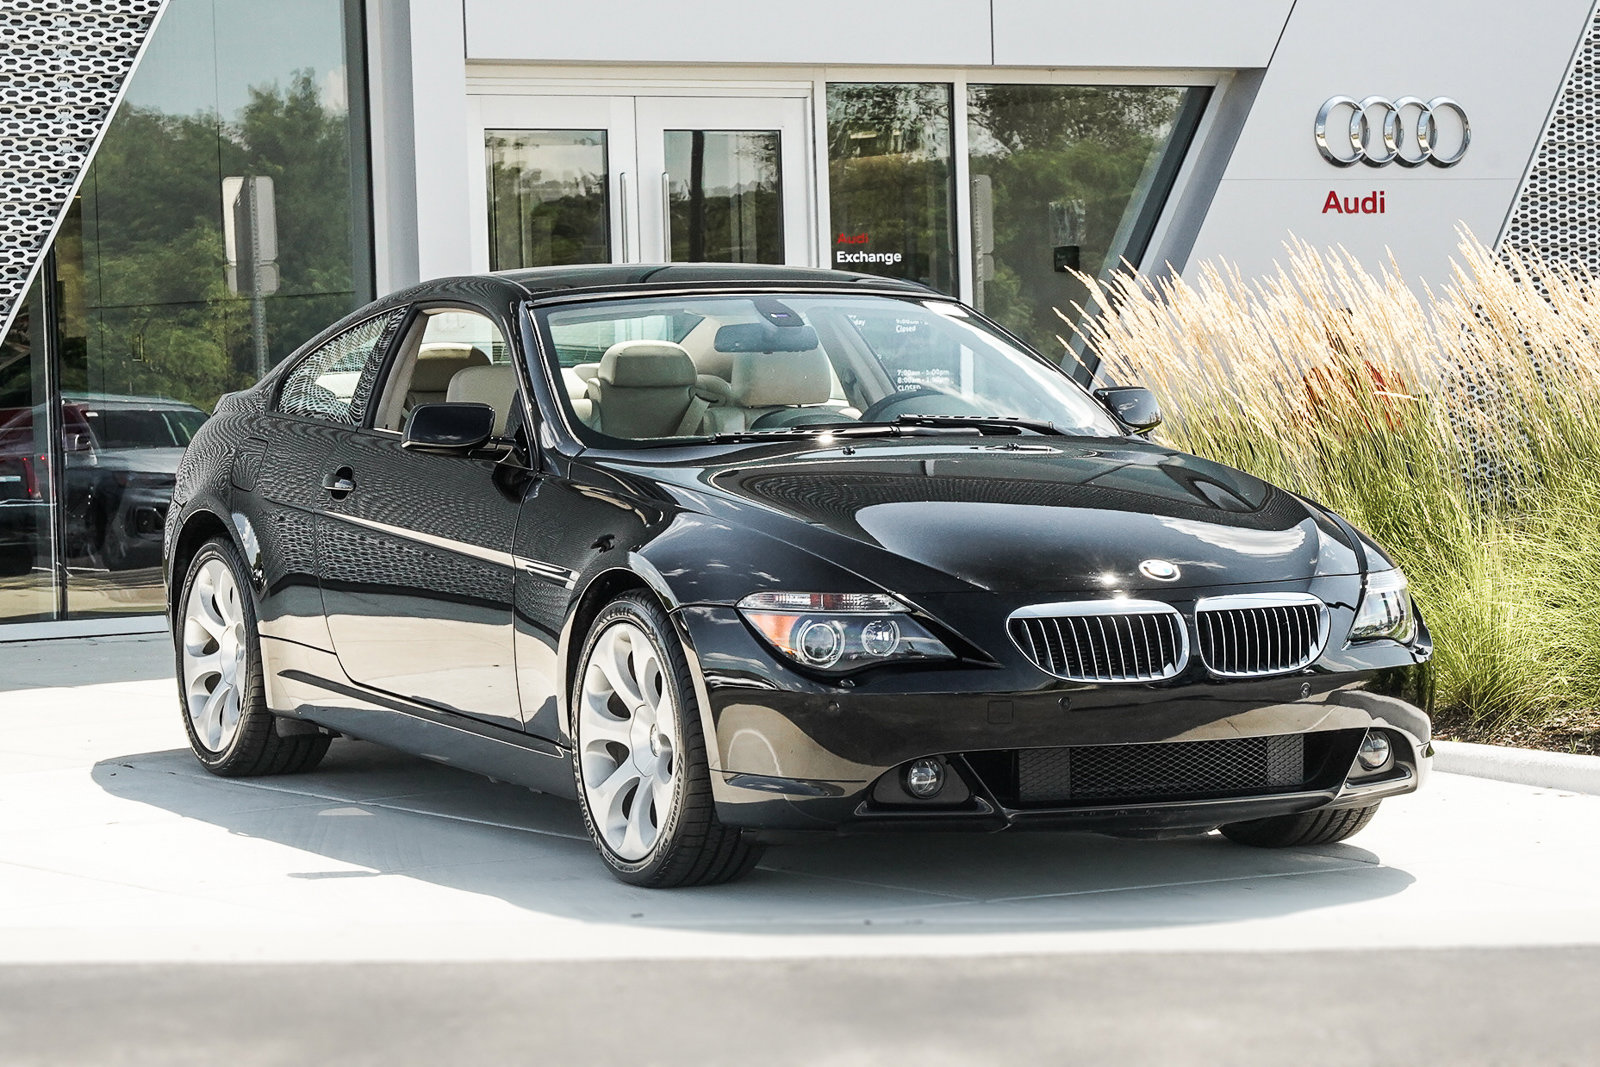 Used 2007 BMW 6 Series 650i with VIN WBAEH13577CR53306 for sale in Saint Charles, IL